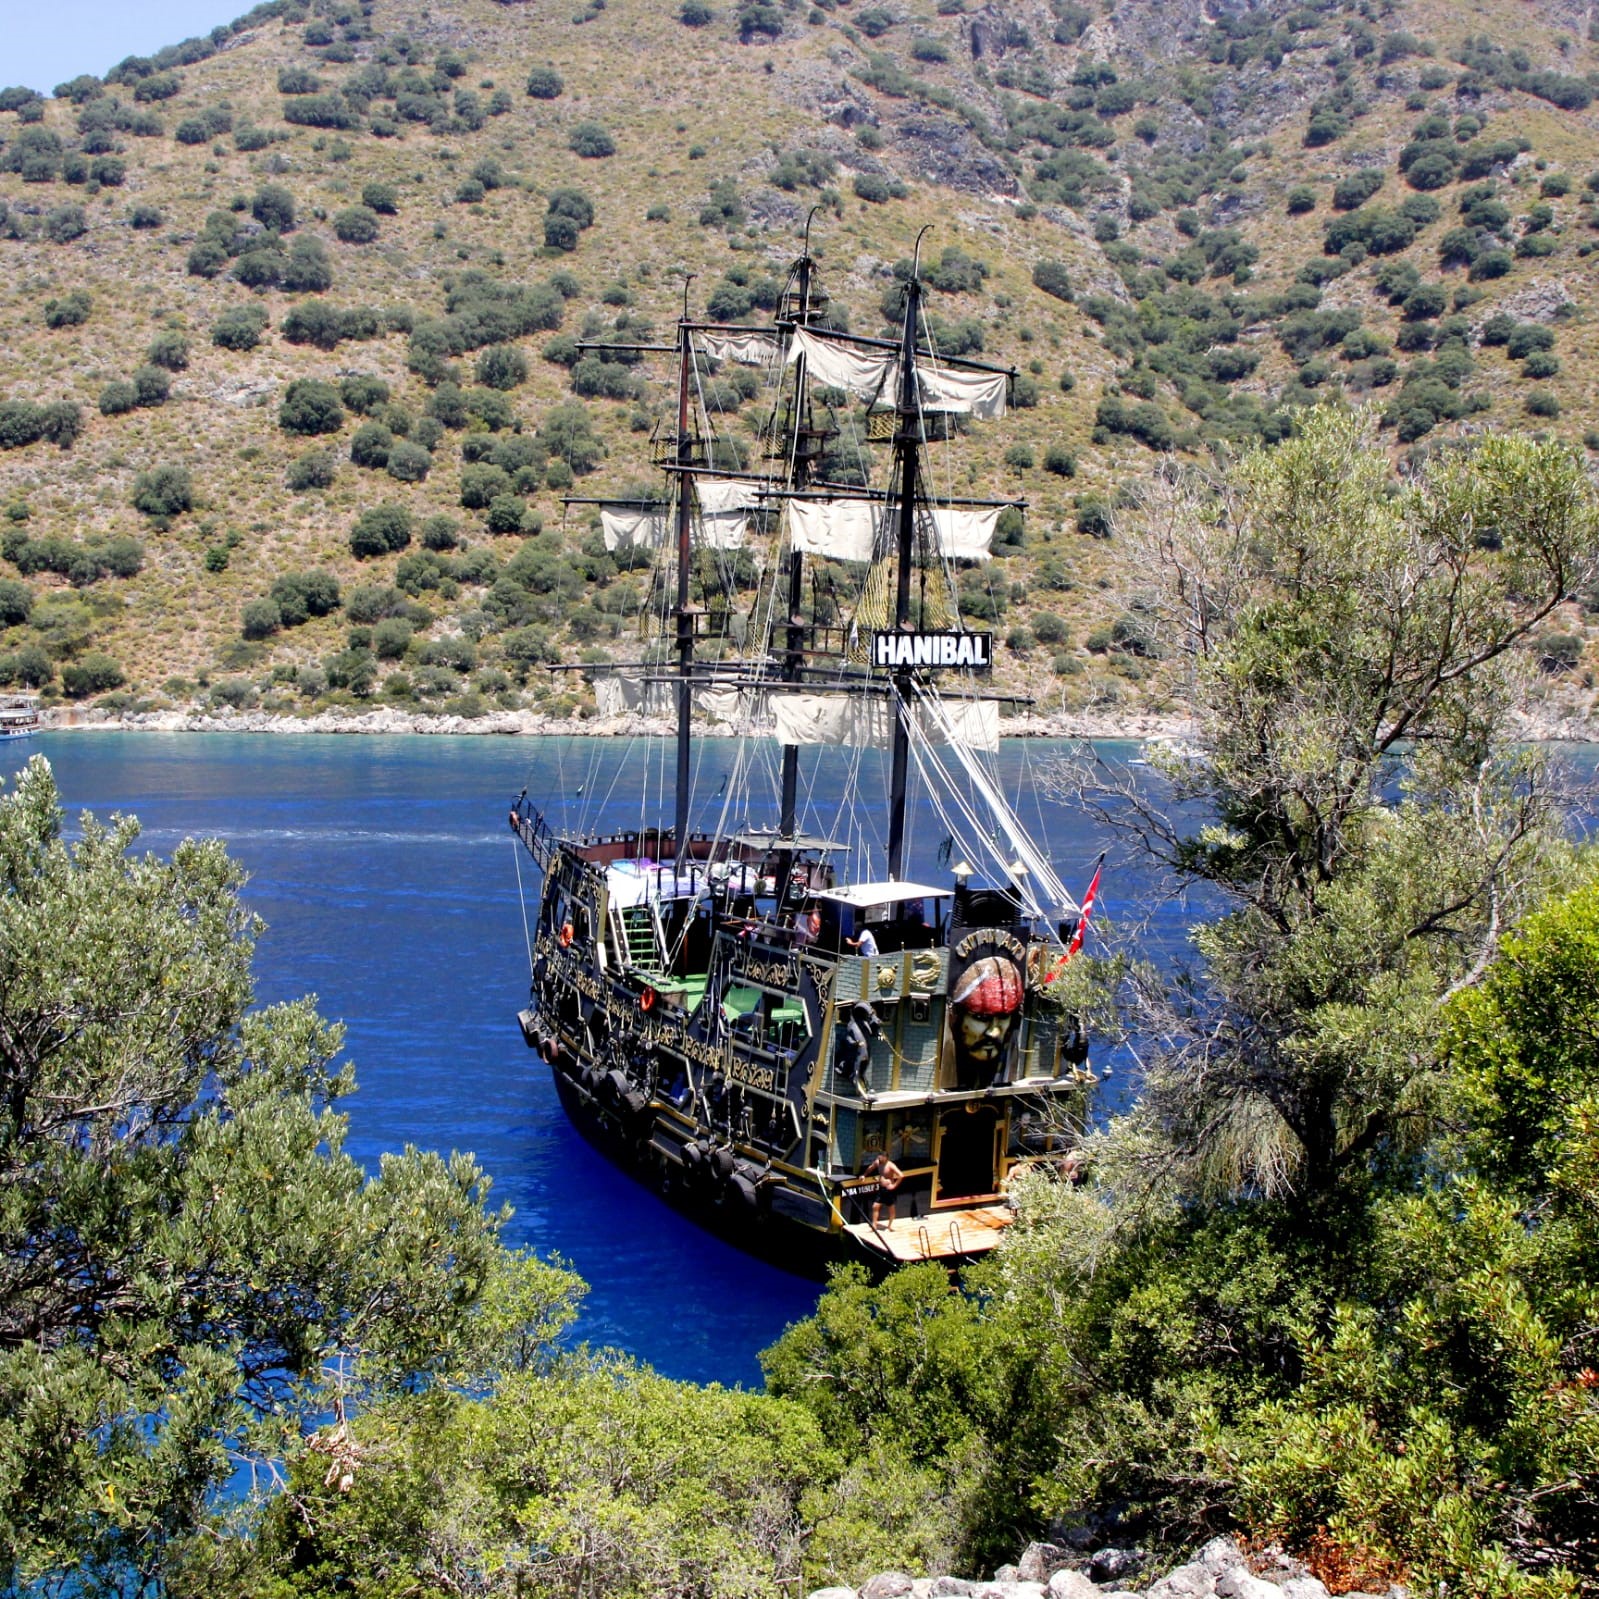 Oludeniz Butterfly Valley Boat Tour with Pirate Boat